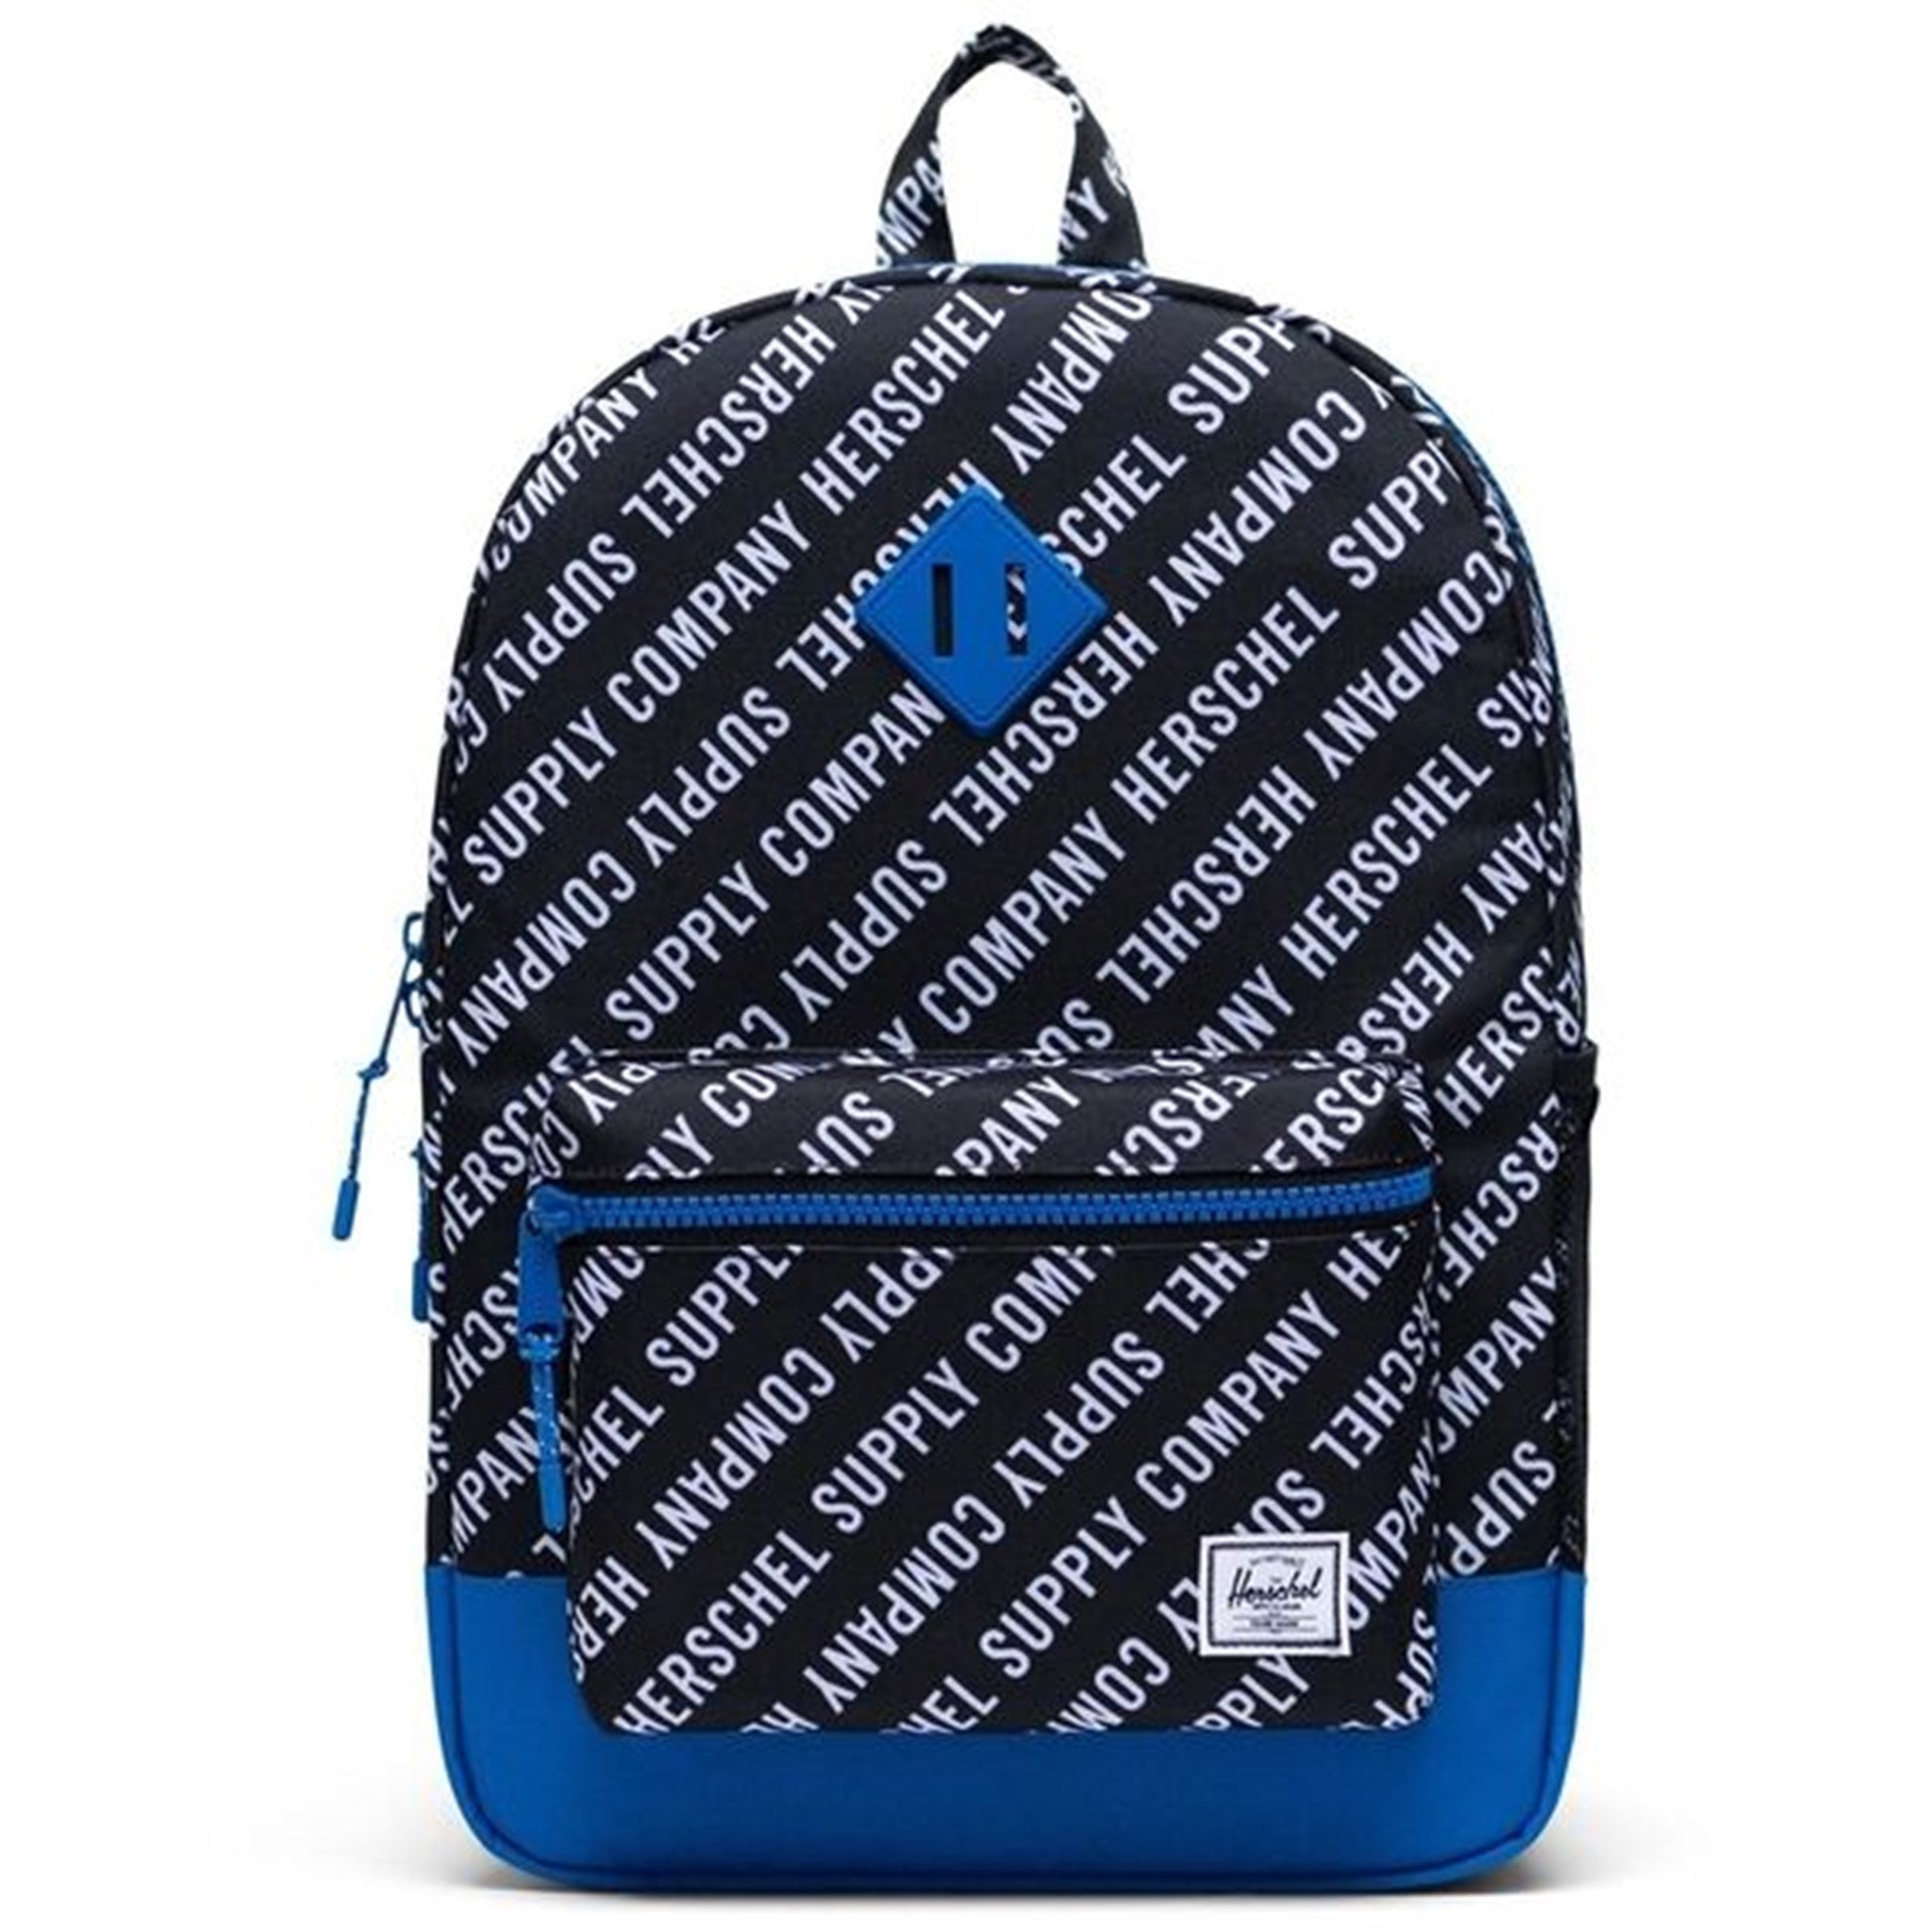 Herschel Heritage Youth XL Backpack Roll Call Black/White/Lapis Blue